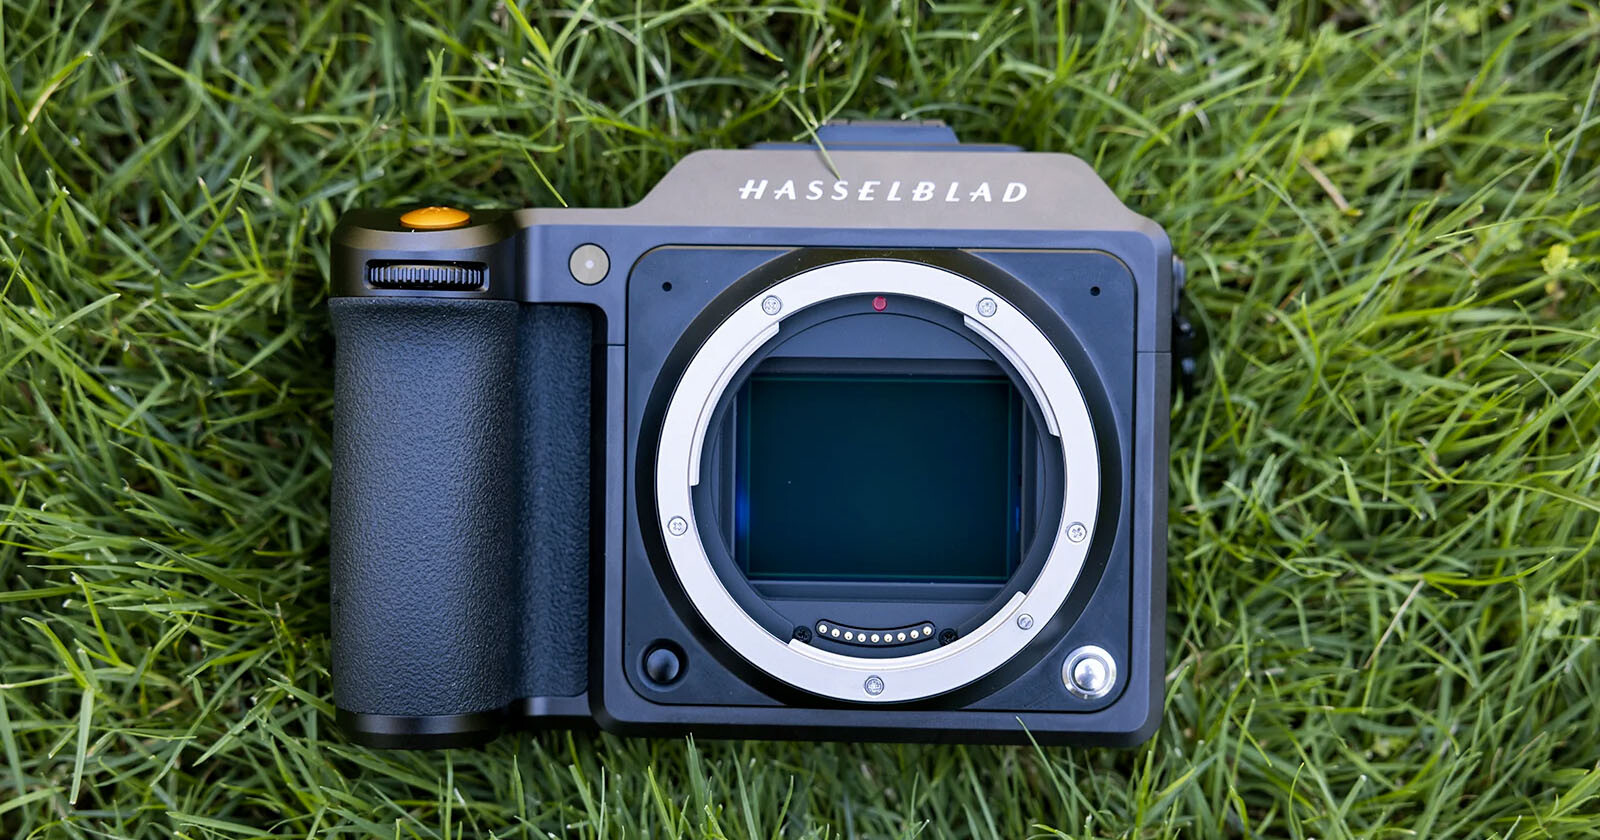 Hasselblad X2D Gets Focus Bracketing, Touch AF, Focus Peaking, And More